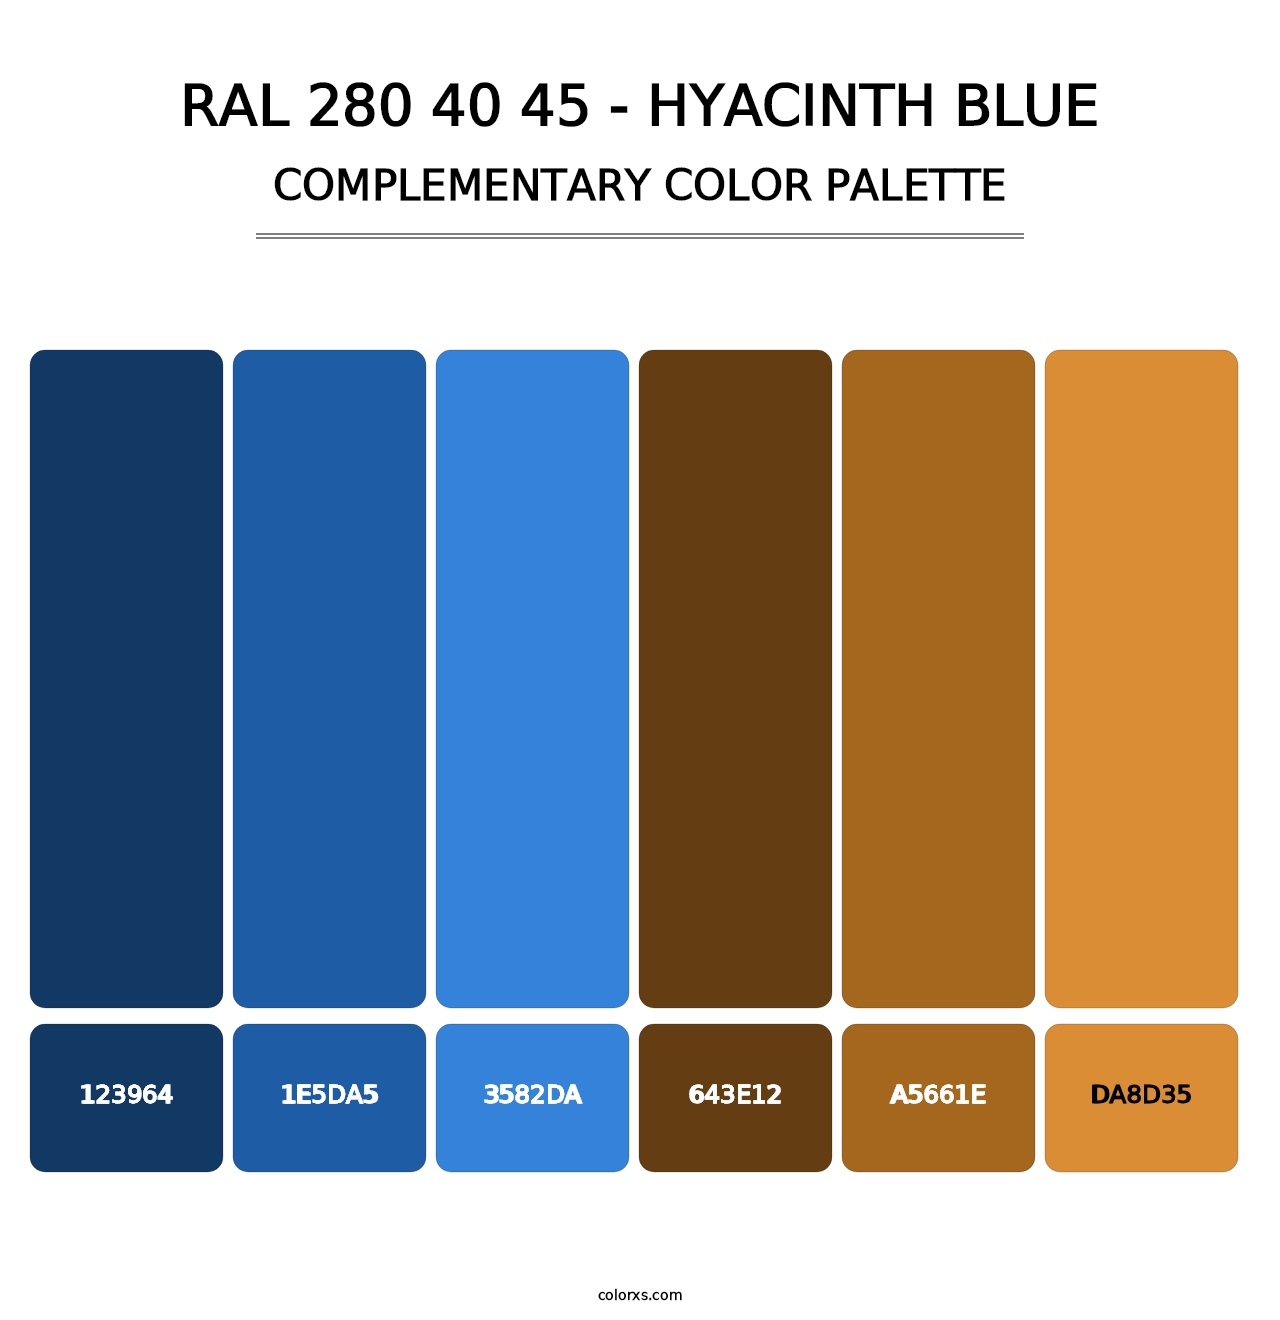 RAL 280 40 45 - Hyacinth Blue - Complementary Color Palette